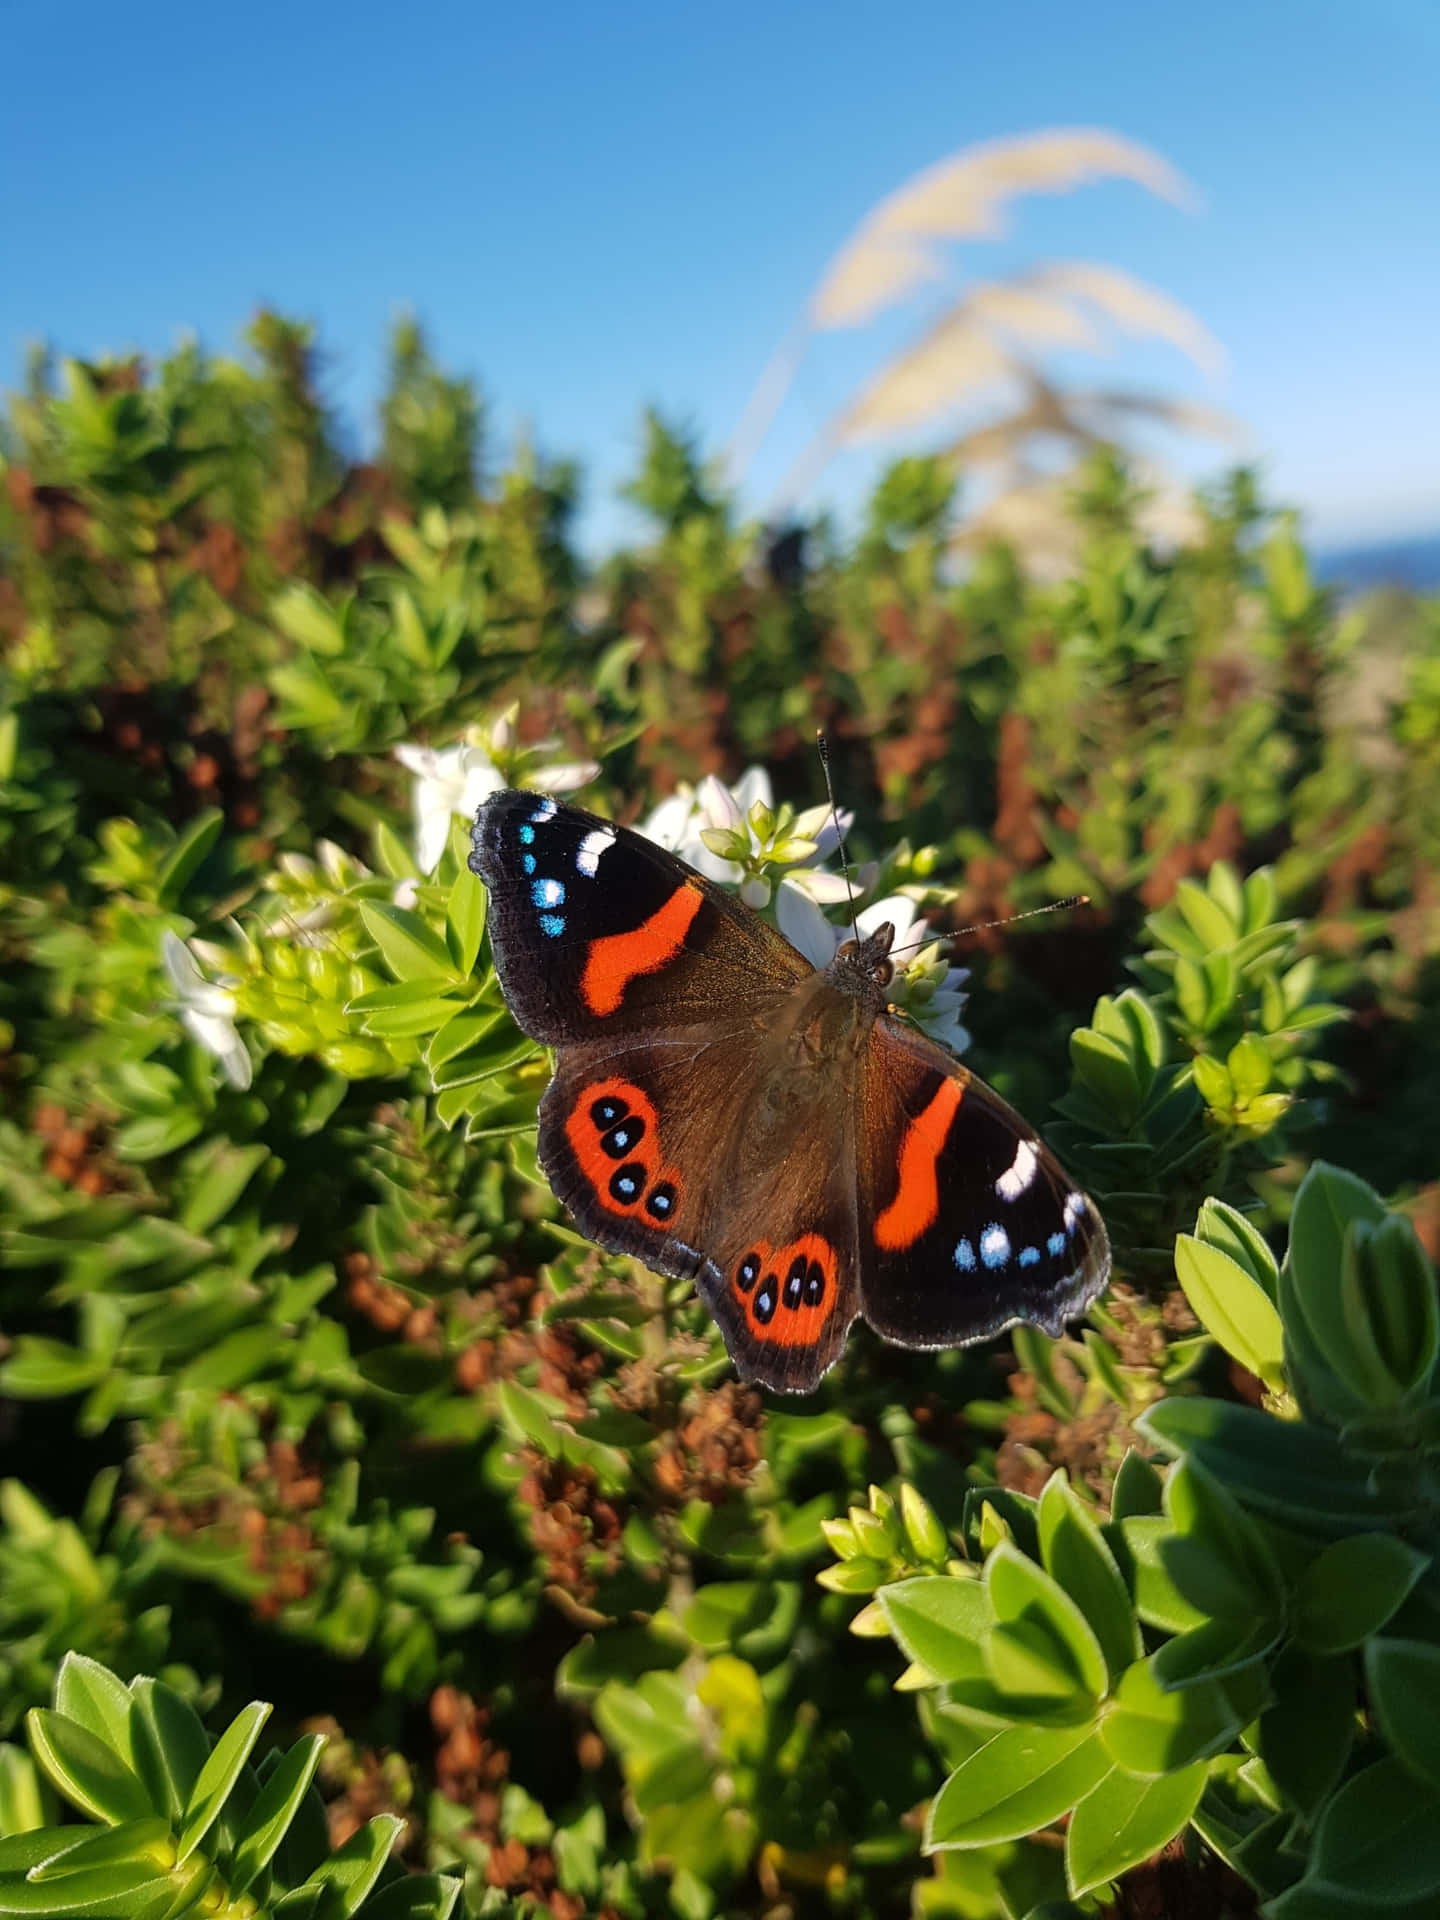 Stunning Red Admiral butterfly perched on a flower Wallpaper